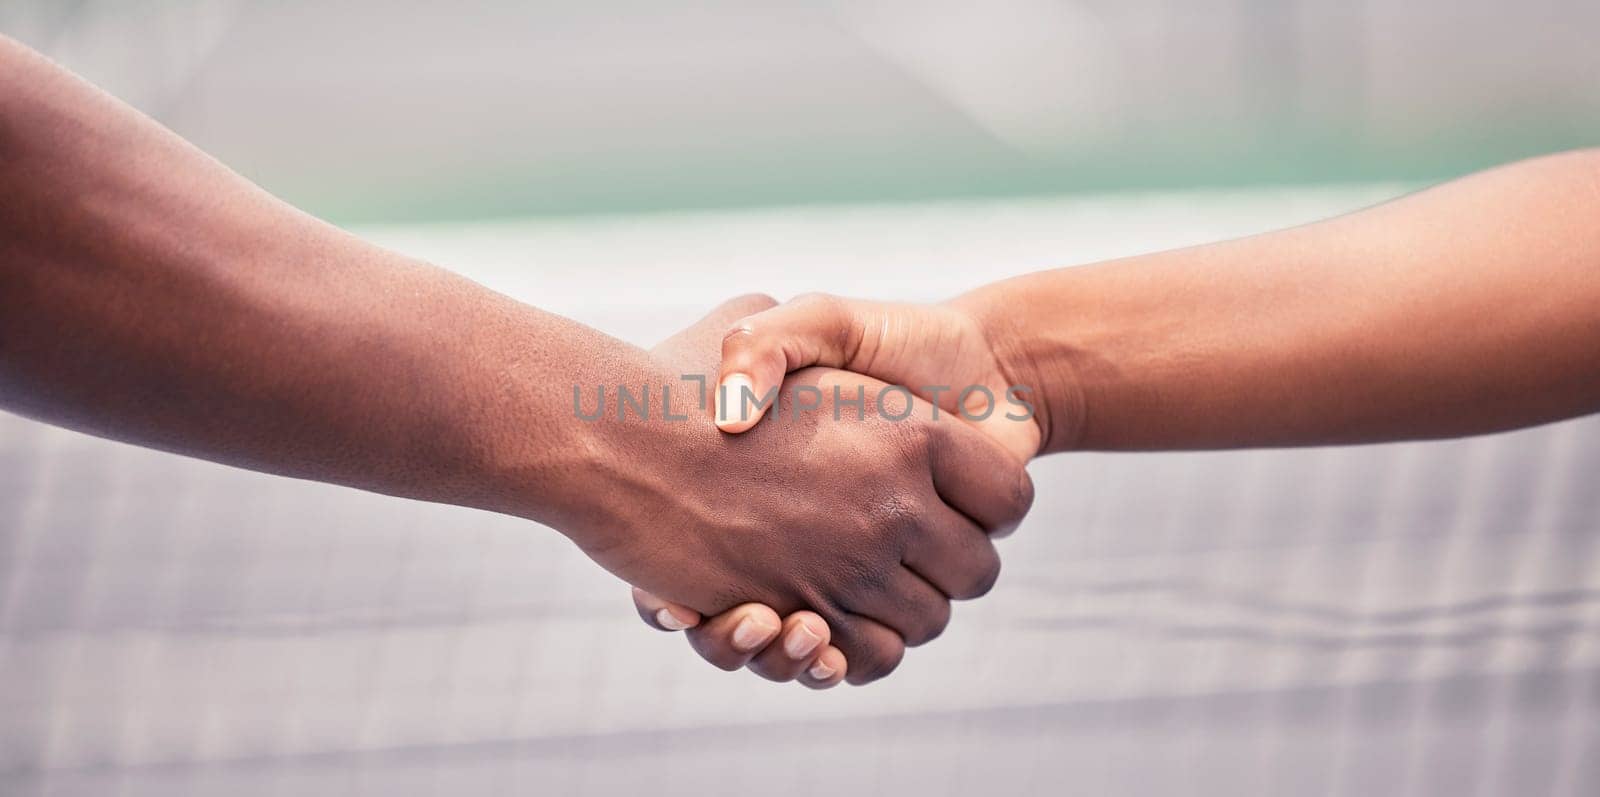 Closeup, handshake and sport for support, teamwork or respect outdoor at tennis court with diversity. Shaking hands, training and sports for fitness, exercise or training together with tennis player.